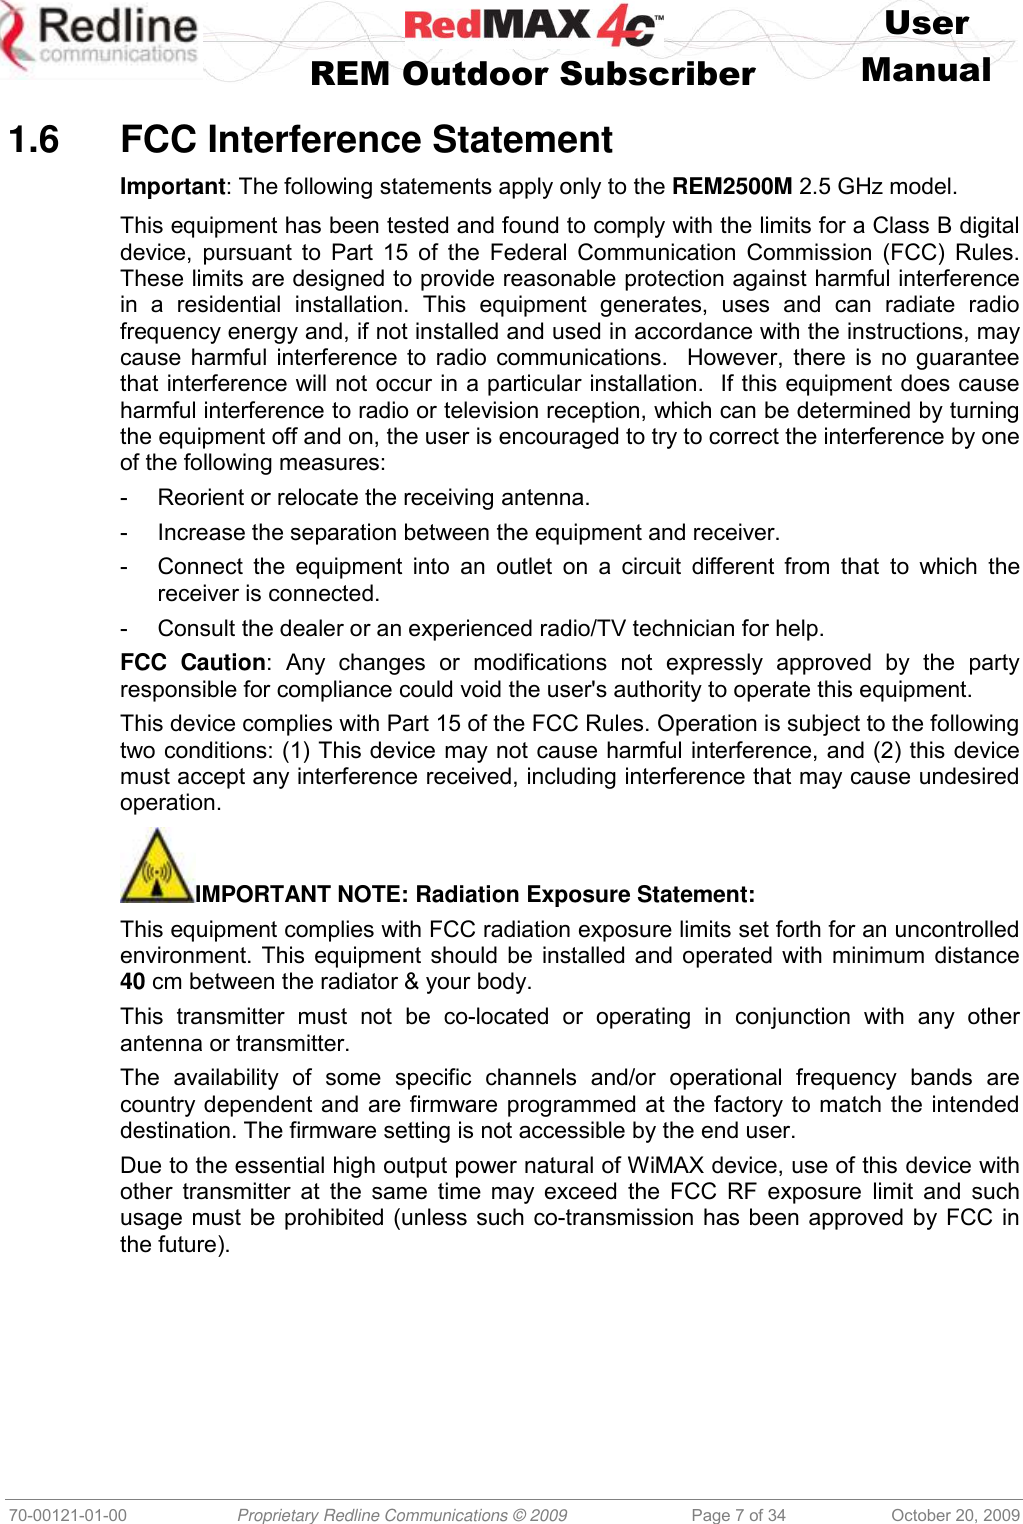    User   REM Outdoor Subscriber  Manual   70-00121-01-00 Proprietary Redline Communications © 2009 Page 7 of 34 October 20, 2009  1.6  FCC Interference Statement Important: The following statements apply only to the REM2500M 2.5 GHz model. This equipment has been tested and found to comply with the limits for a Class B digital device, pursuant to Part 15 of the  Federal Communication Commission (FCC)  Rules.  These limits are designed to provide reasonable protection against harmful interference in  a  residential  installation.  This  equipment  generates,  uses  and  can  radiate  radio frequency energy and, if not installed and used in accordance with the instructions, may cause harmful interference to radio communications.  However, there is no guarantee that interference will not occur in a particular installation.  If this equipment does cause harmful interference to radio or television reception, which can be determined by turning the equipment off and on, the user is encouraged to try to correct the interference by one of the following measures: -  Reorient or relocate the receiving antenna. -  Increase the separation between the equipment and receiver. -  Connect the  equipment into  an  outlet  on  a  circuit different from  that  to which  the receiver is connected. -  Consult the dealer or an experienced radio/TV technician for help. FCC  Caution:  Any  changes  or  modifications  not  expressly  approved  by  the  party responsible for compliance could void the user&apos;s authority to operate this equipment. This device complies with Part 15 of the FCC Rules. Operation is subject to the following two conditions: (1) This device may not cause harmful interference, and (2) this device must accept any interference received, including interference that may cause undesired operation. IMPORTANT NOTE: Radiation Exposure Statement: This equipment complies with FCC radiation exposure limits set forth for an uncontrolled environment. This equipment should be installed and operated with minimum distance 40 cm between the radiator &amp; your body. This  transmitter  must  not  be  co-located  or  operating  in  conjunction  with  any  other antenna or transmitter. The  availability  of  some  specific  channels  and/or  operational  frequency  bands  are country dependent and are firmware programmed at the factory to match the intended destination. The firmware setting is not accessible by the end user. Due to the essential high output power natural of WiMAX device, use of this device with other transmitter at the same time may exceed the FCC RF exposure limit and such usage must be prohibited (unless such co-transmission has been approved by FCC in the future).  